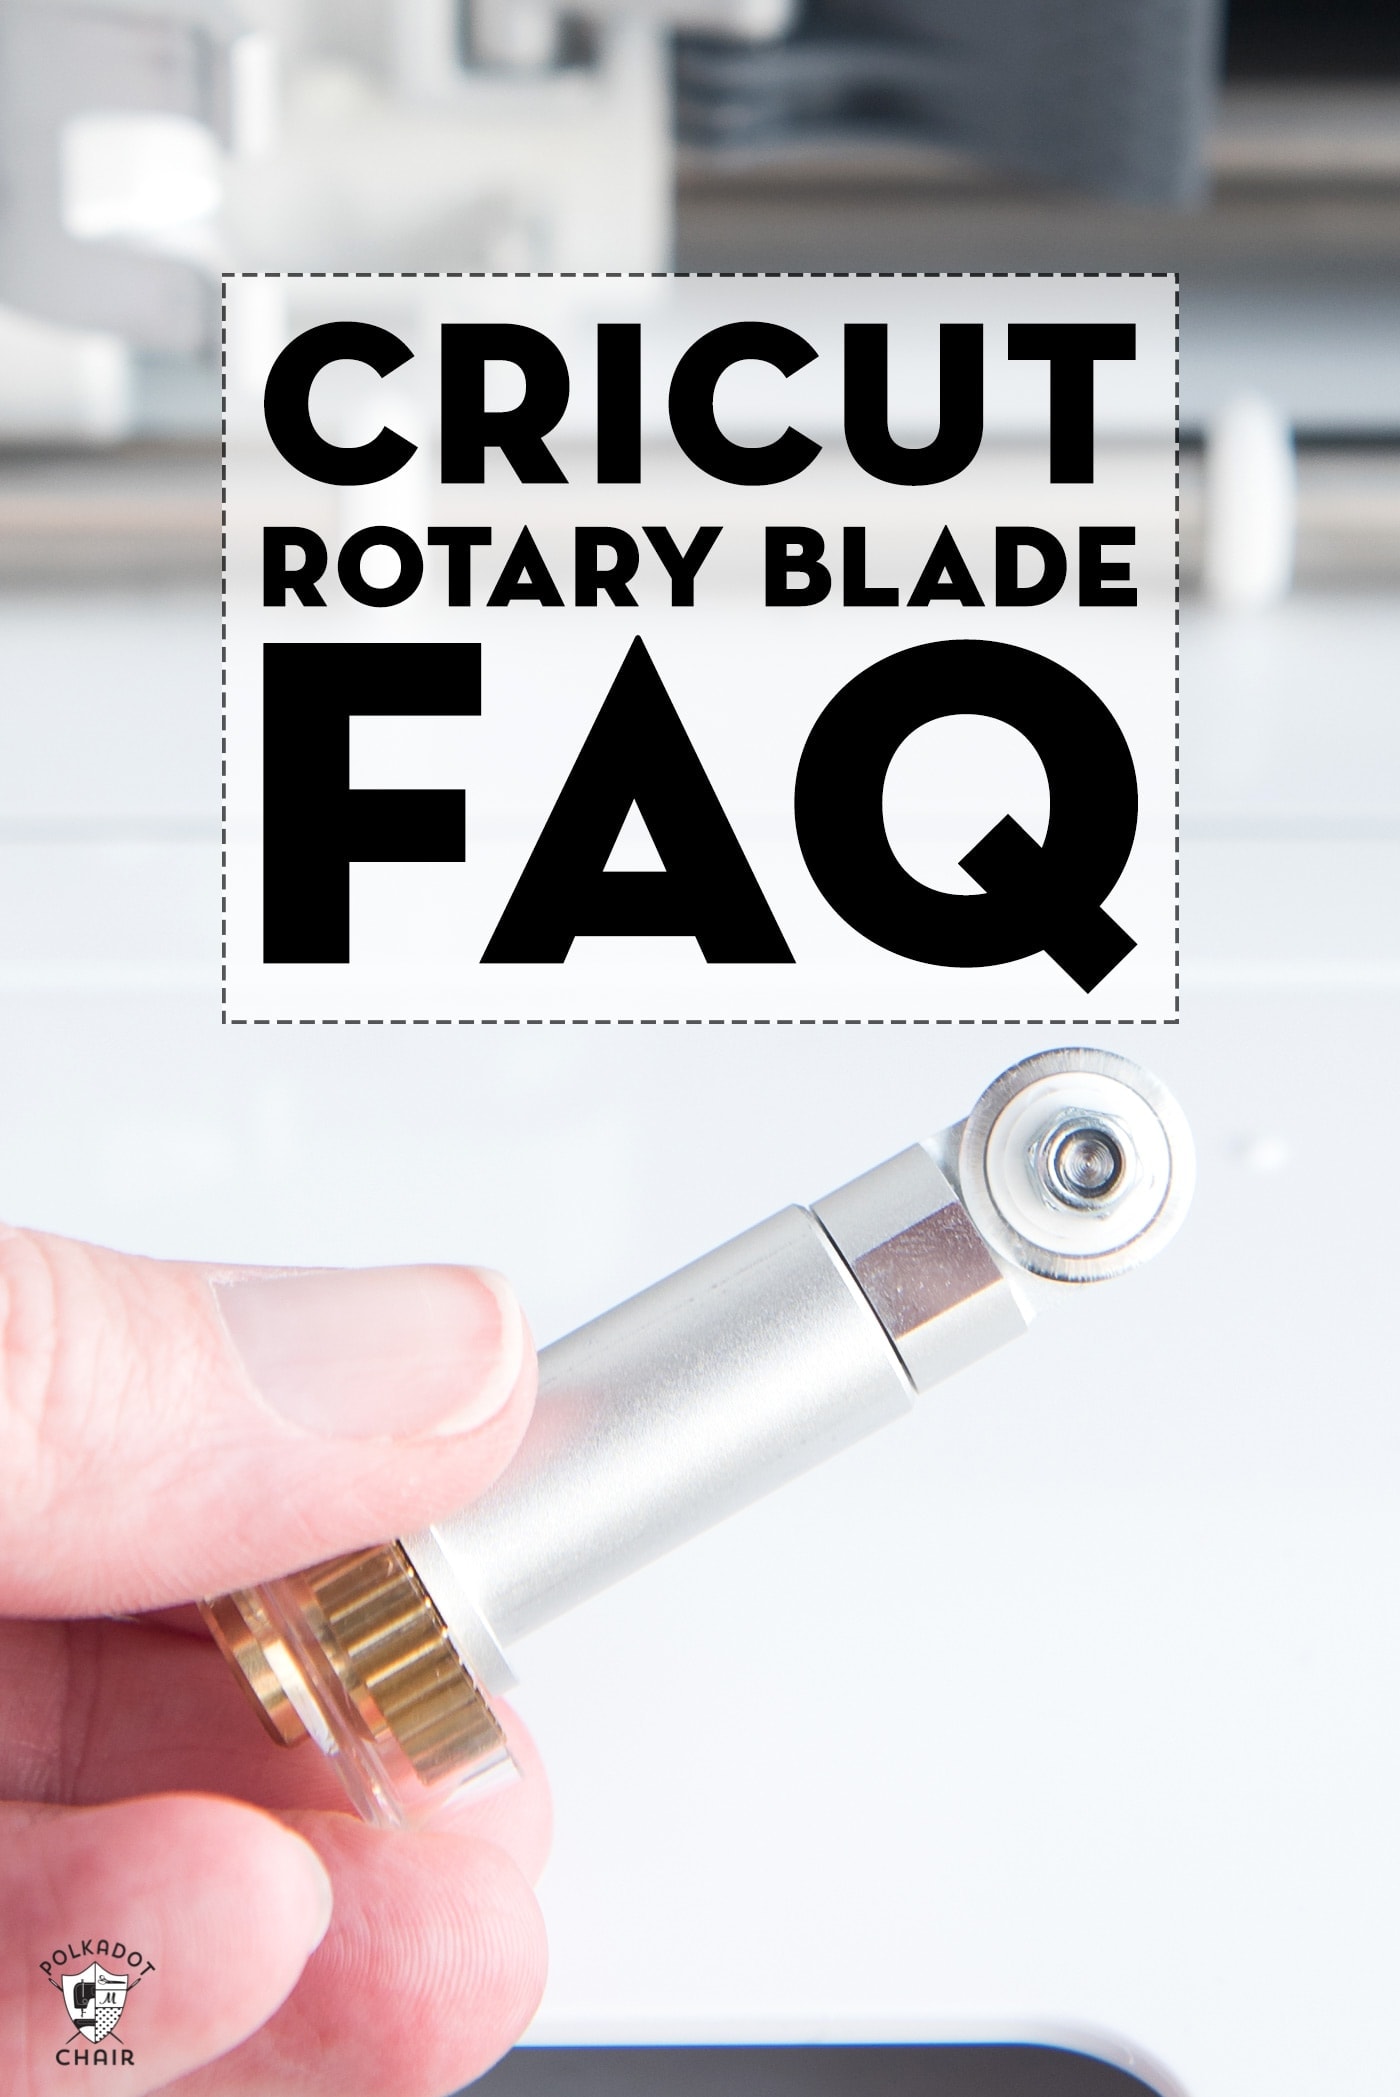 A GUIDE TO CRICUT BLADES AND TOOLS